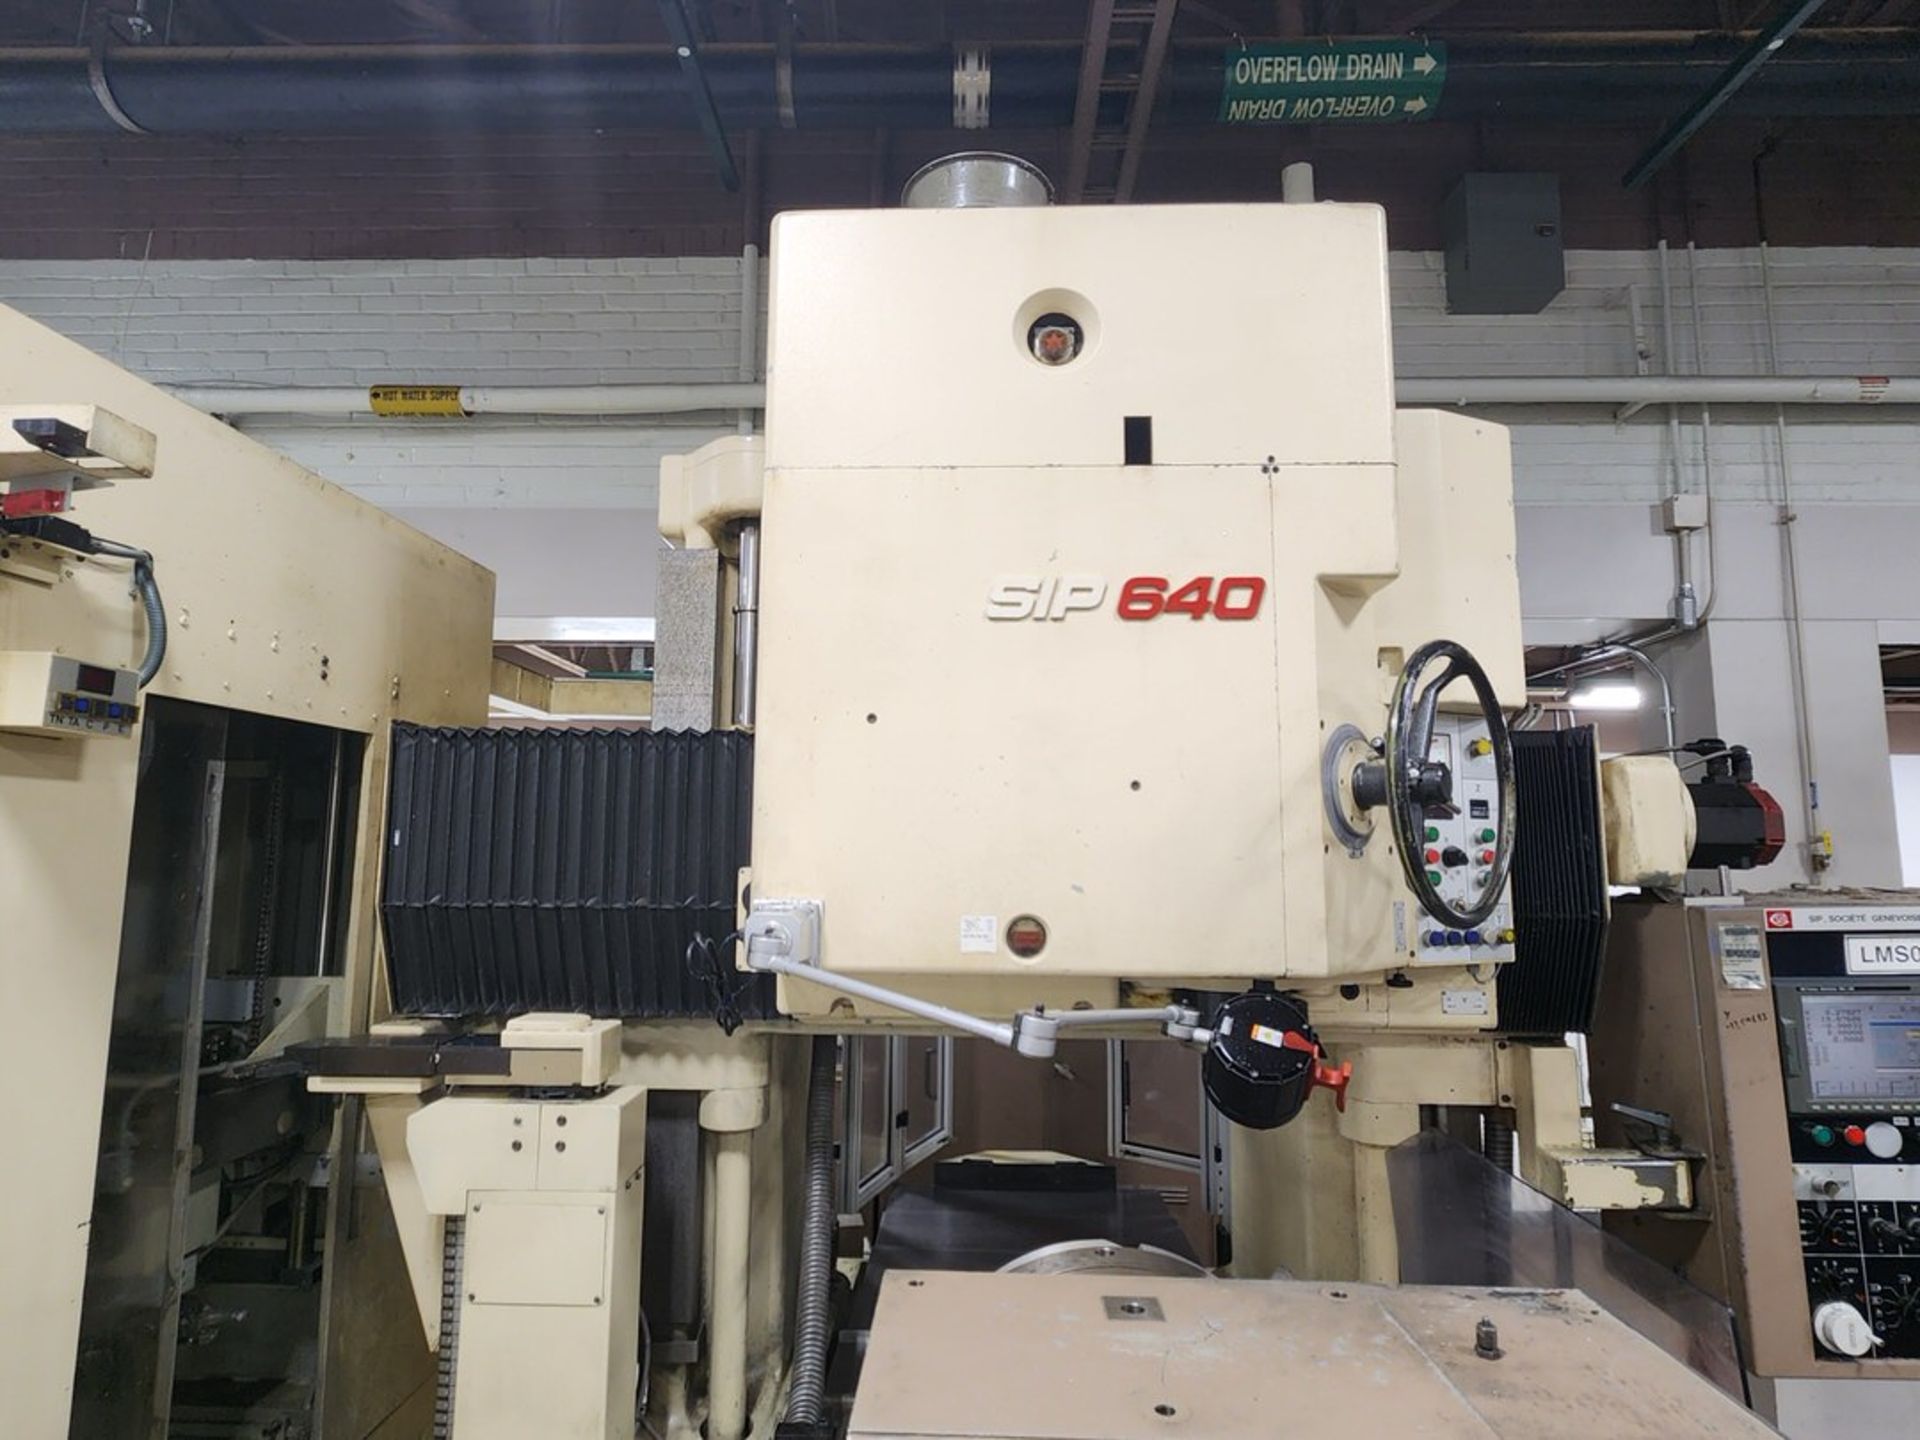 SIP SIP-640 Jig Boring Machine W/ Fanuc Series 16i-M Controller; Cutting Time: 15,304hrs - Image 6 of 36